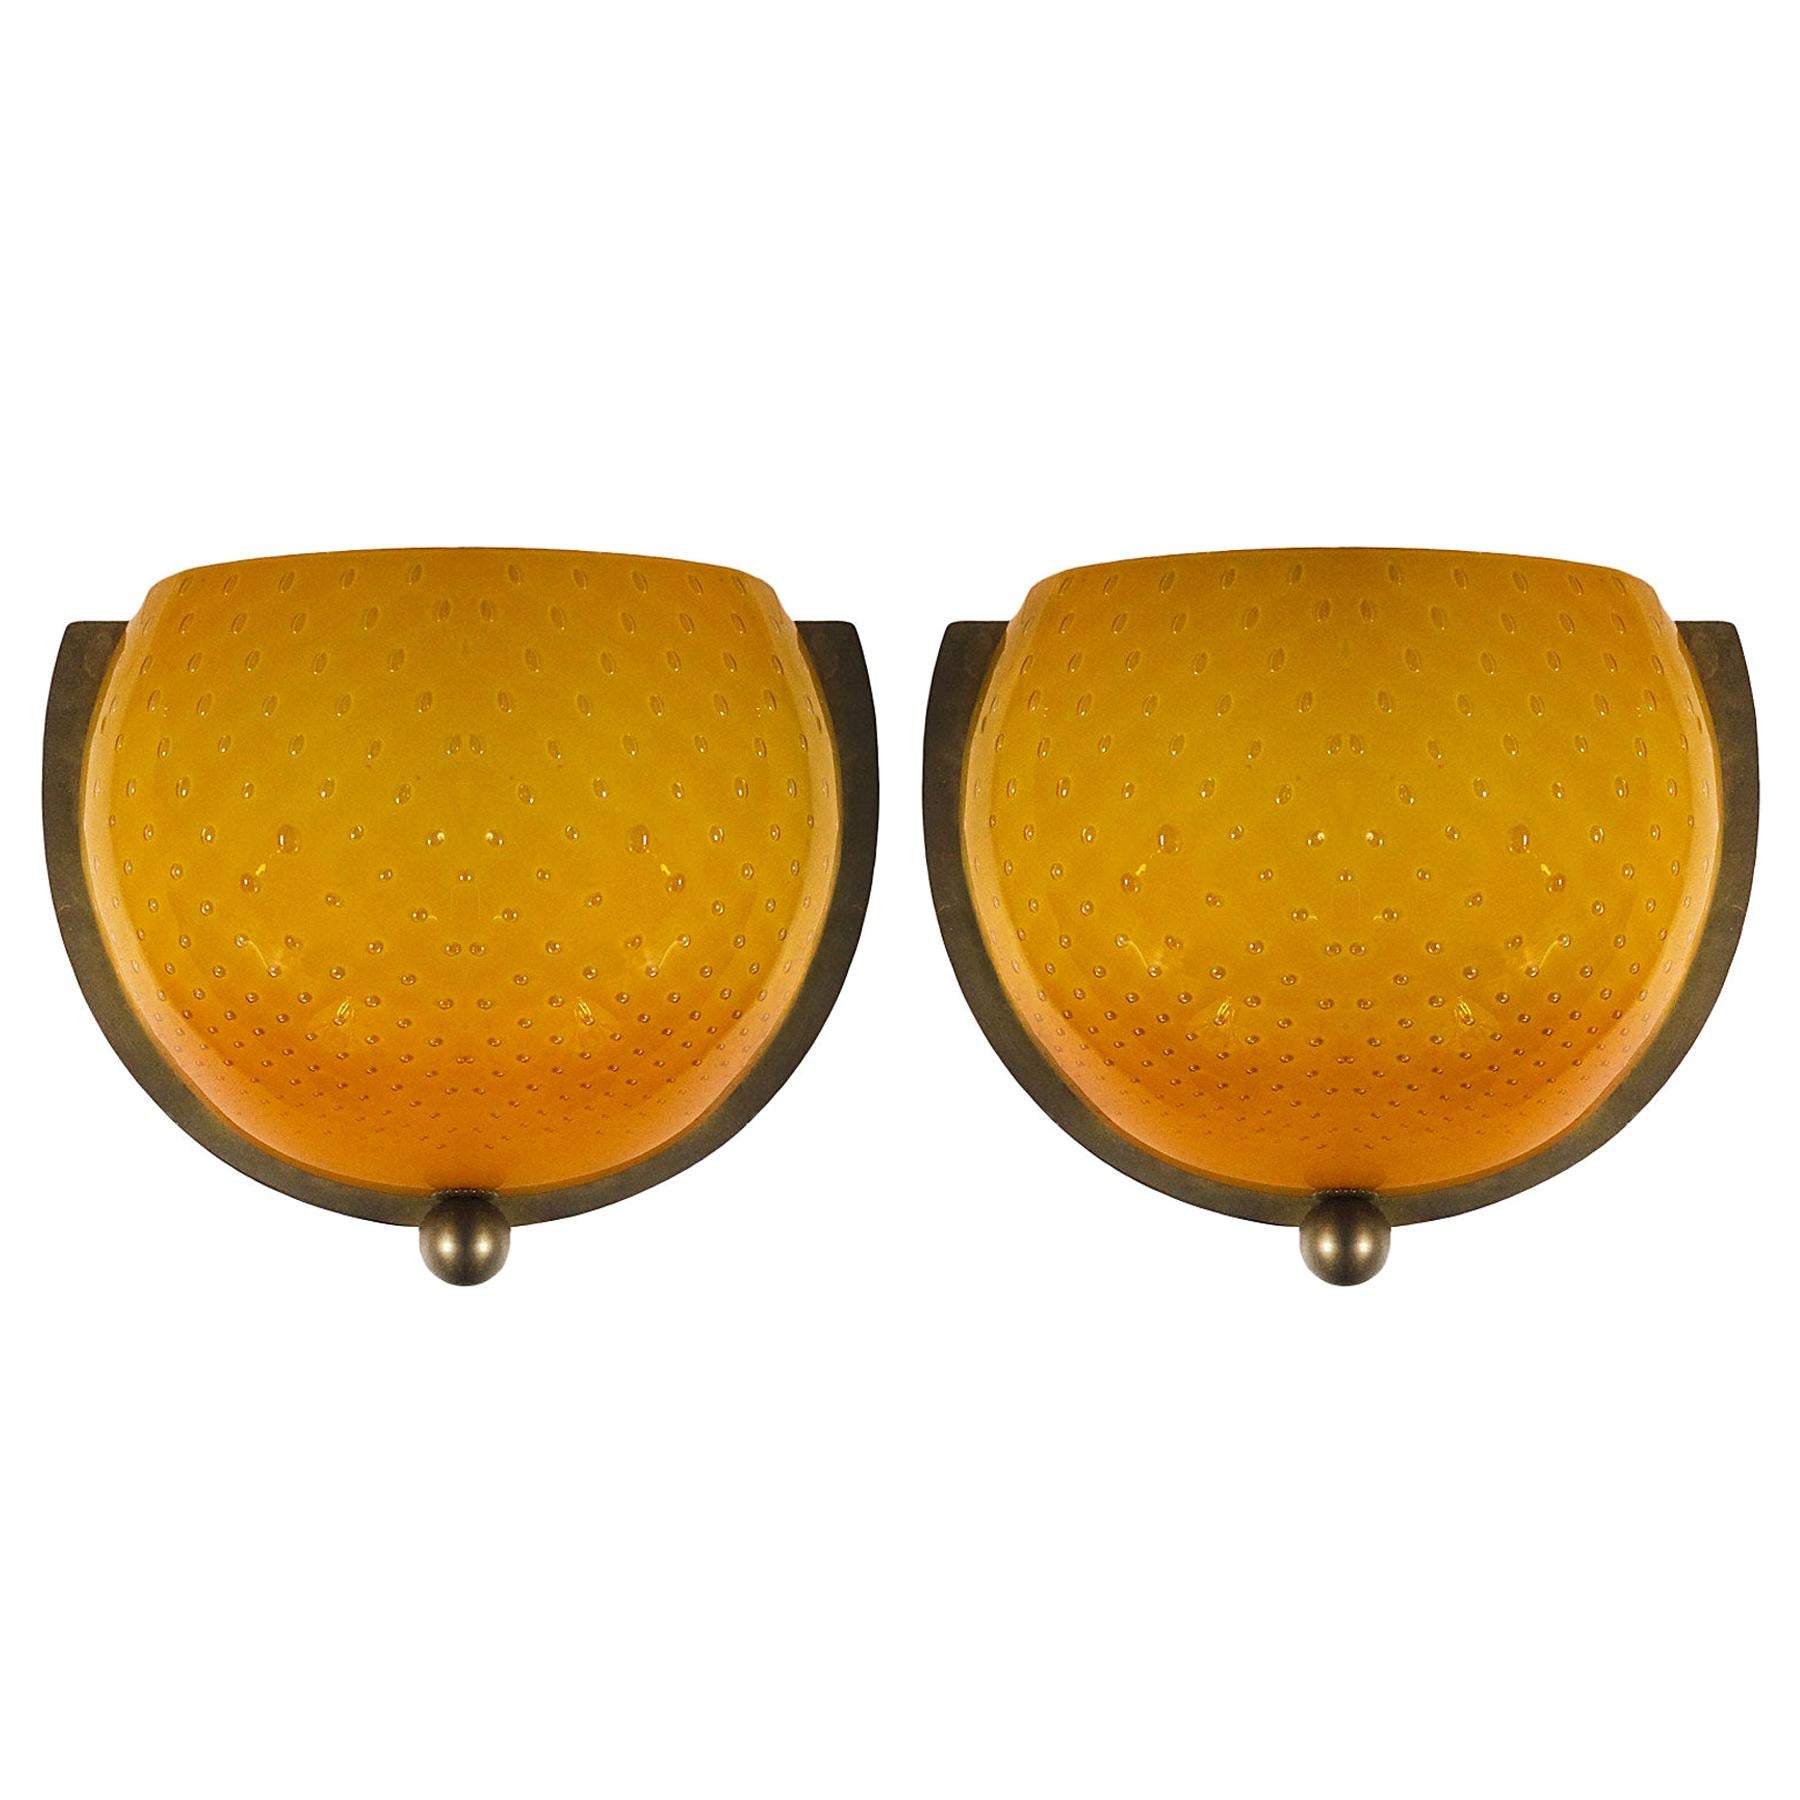 1970s Pair of Wall Lights in Brass, Yellow-Orange Bubble Molten Glass - Italy